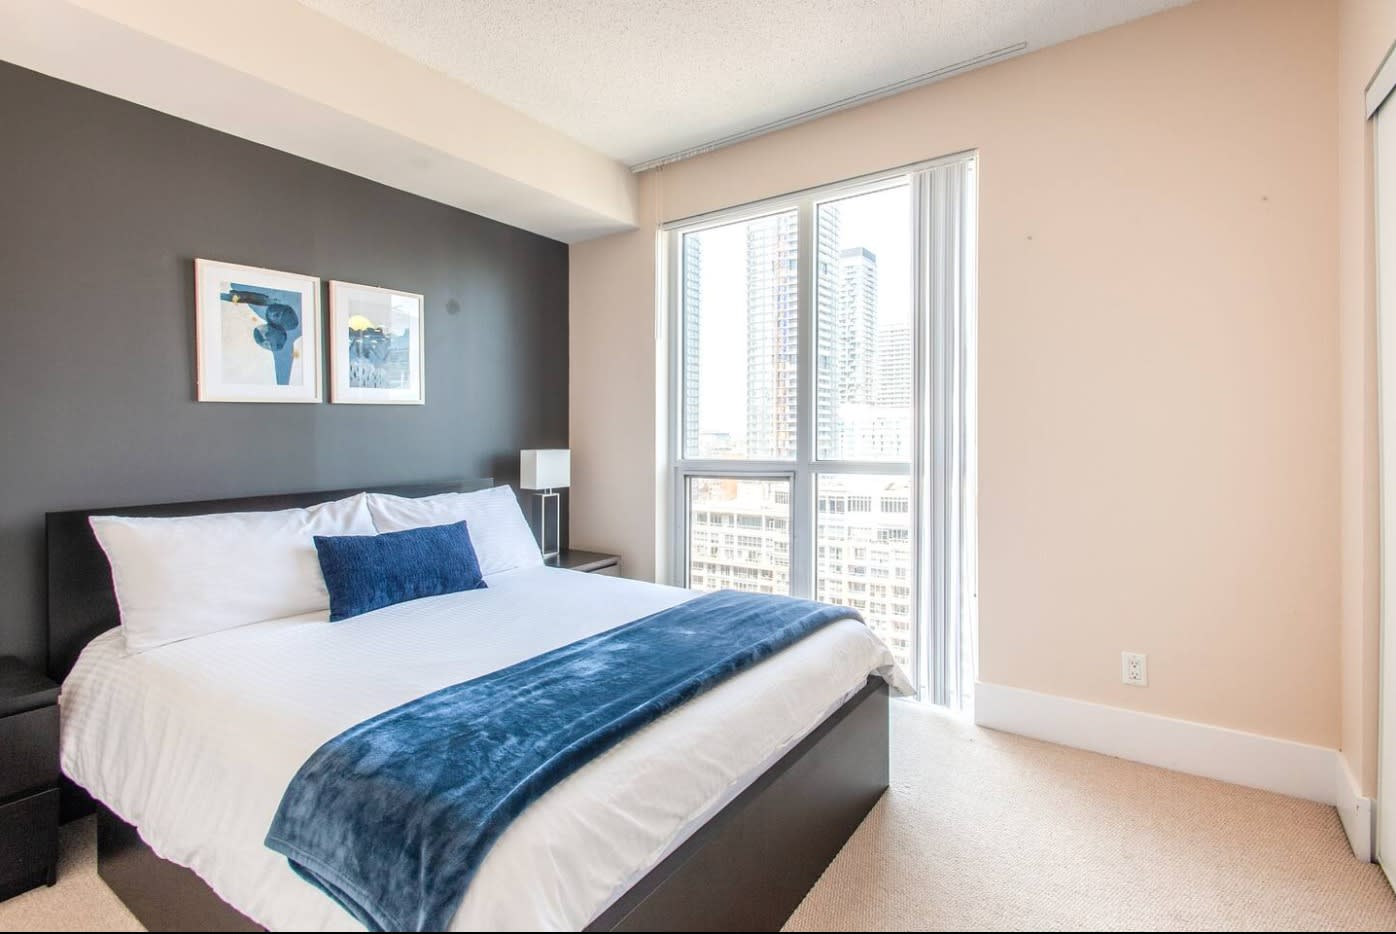 Property Image 1 - Luxury High Rise with King Bed, Private Balcony & Netflix, Stunning Views of DT Toronto!